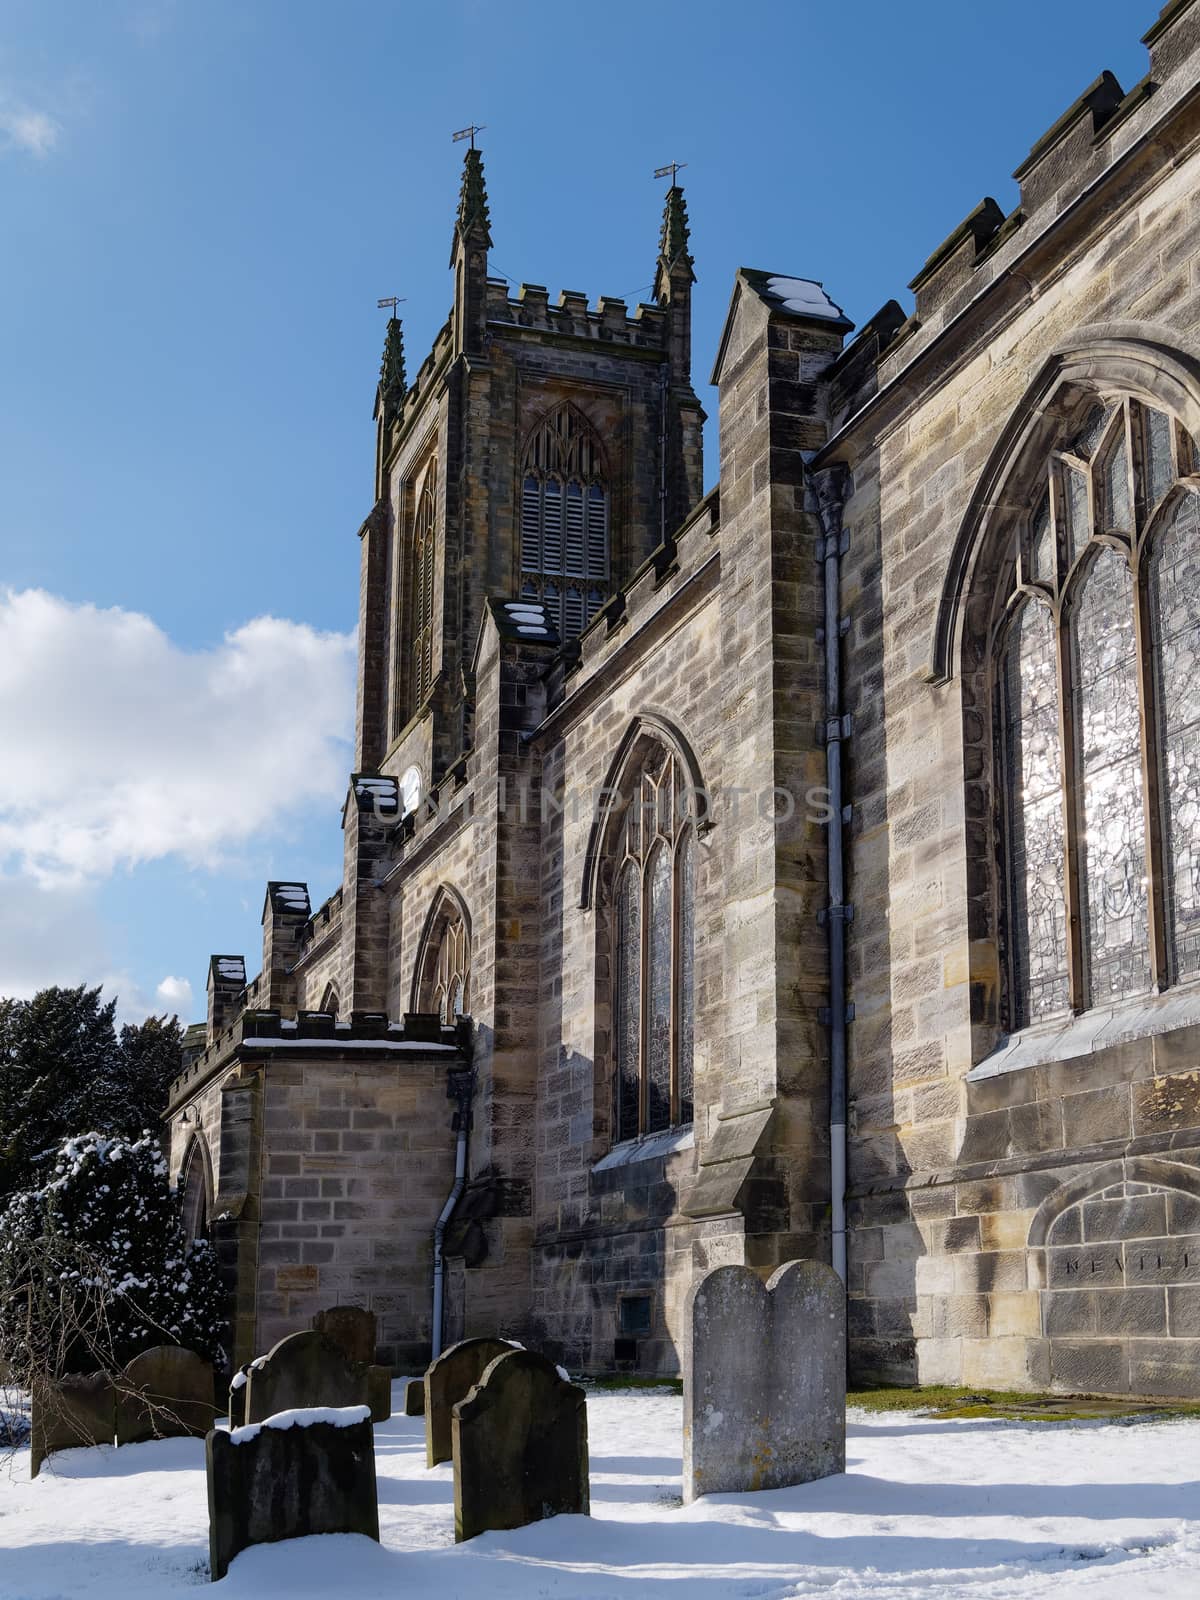 EAST GRINSTEAD, WEST SUSSEX/UK - FEBRUARY 27 : St Swithun's Church in East Grinstead on February 27, 2018